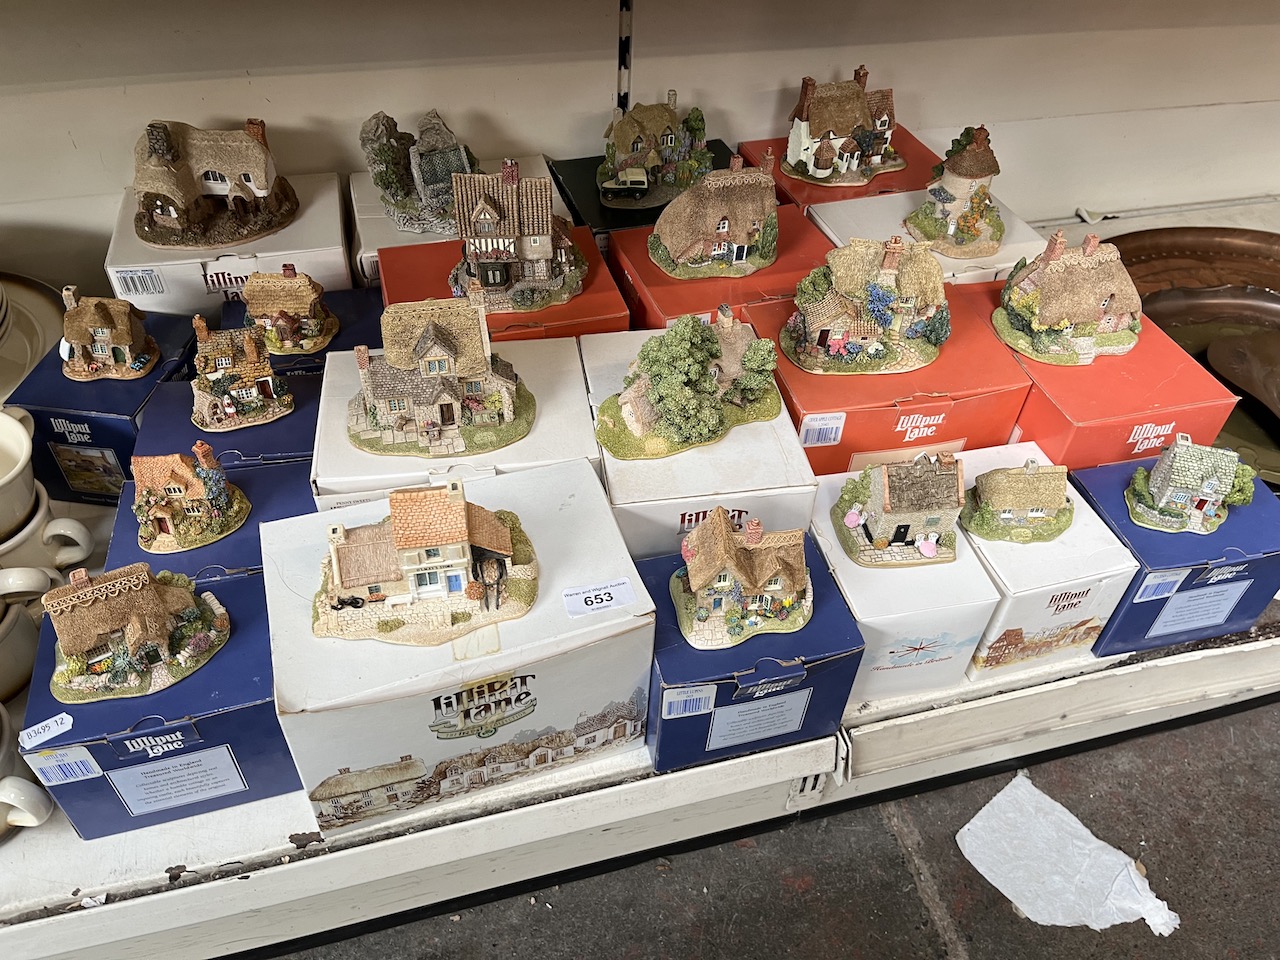 Appx 21 Lilliput Lane figures, all boxed, various sizes, including O'Laceys Store and Rustic Root